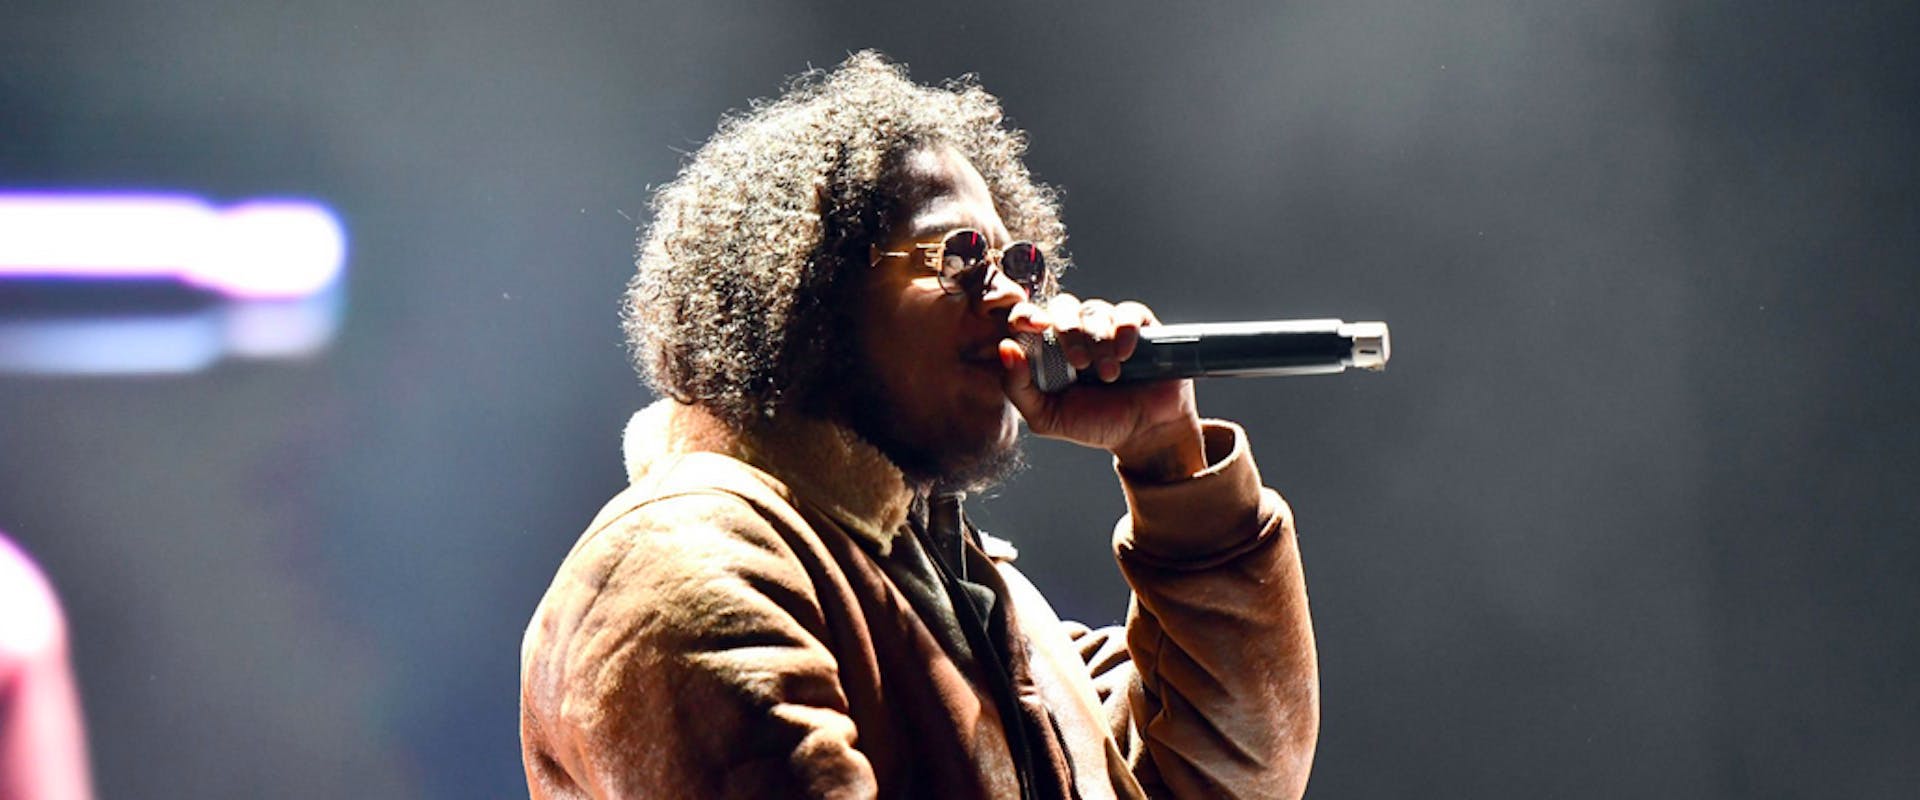 LOS ANGELES, CALIFORNIA - DECEMBER 14: Rapper Ab-Soul performs onstage during day one of the Rolling Loud Festival at Banc of California Stadium on December 14, 2018 in Los Angeles, California. (